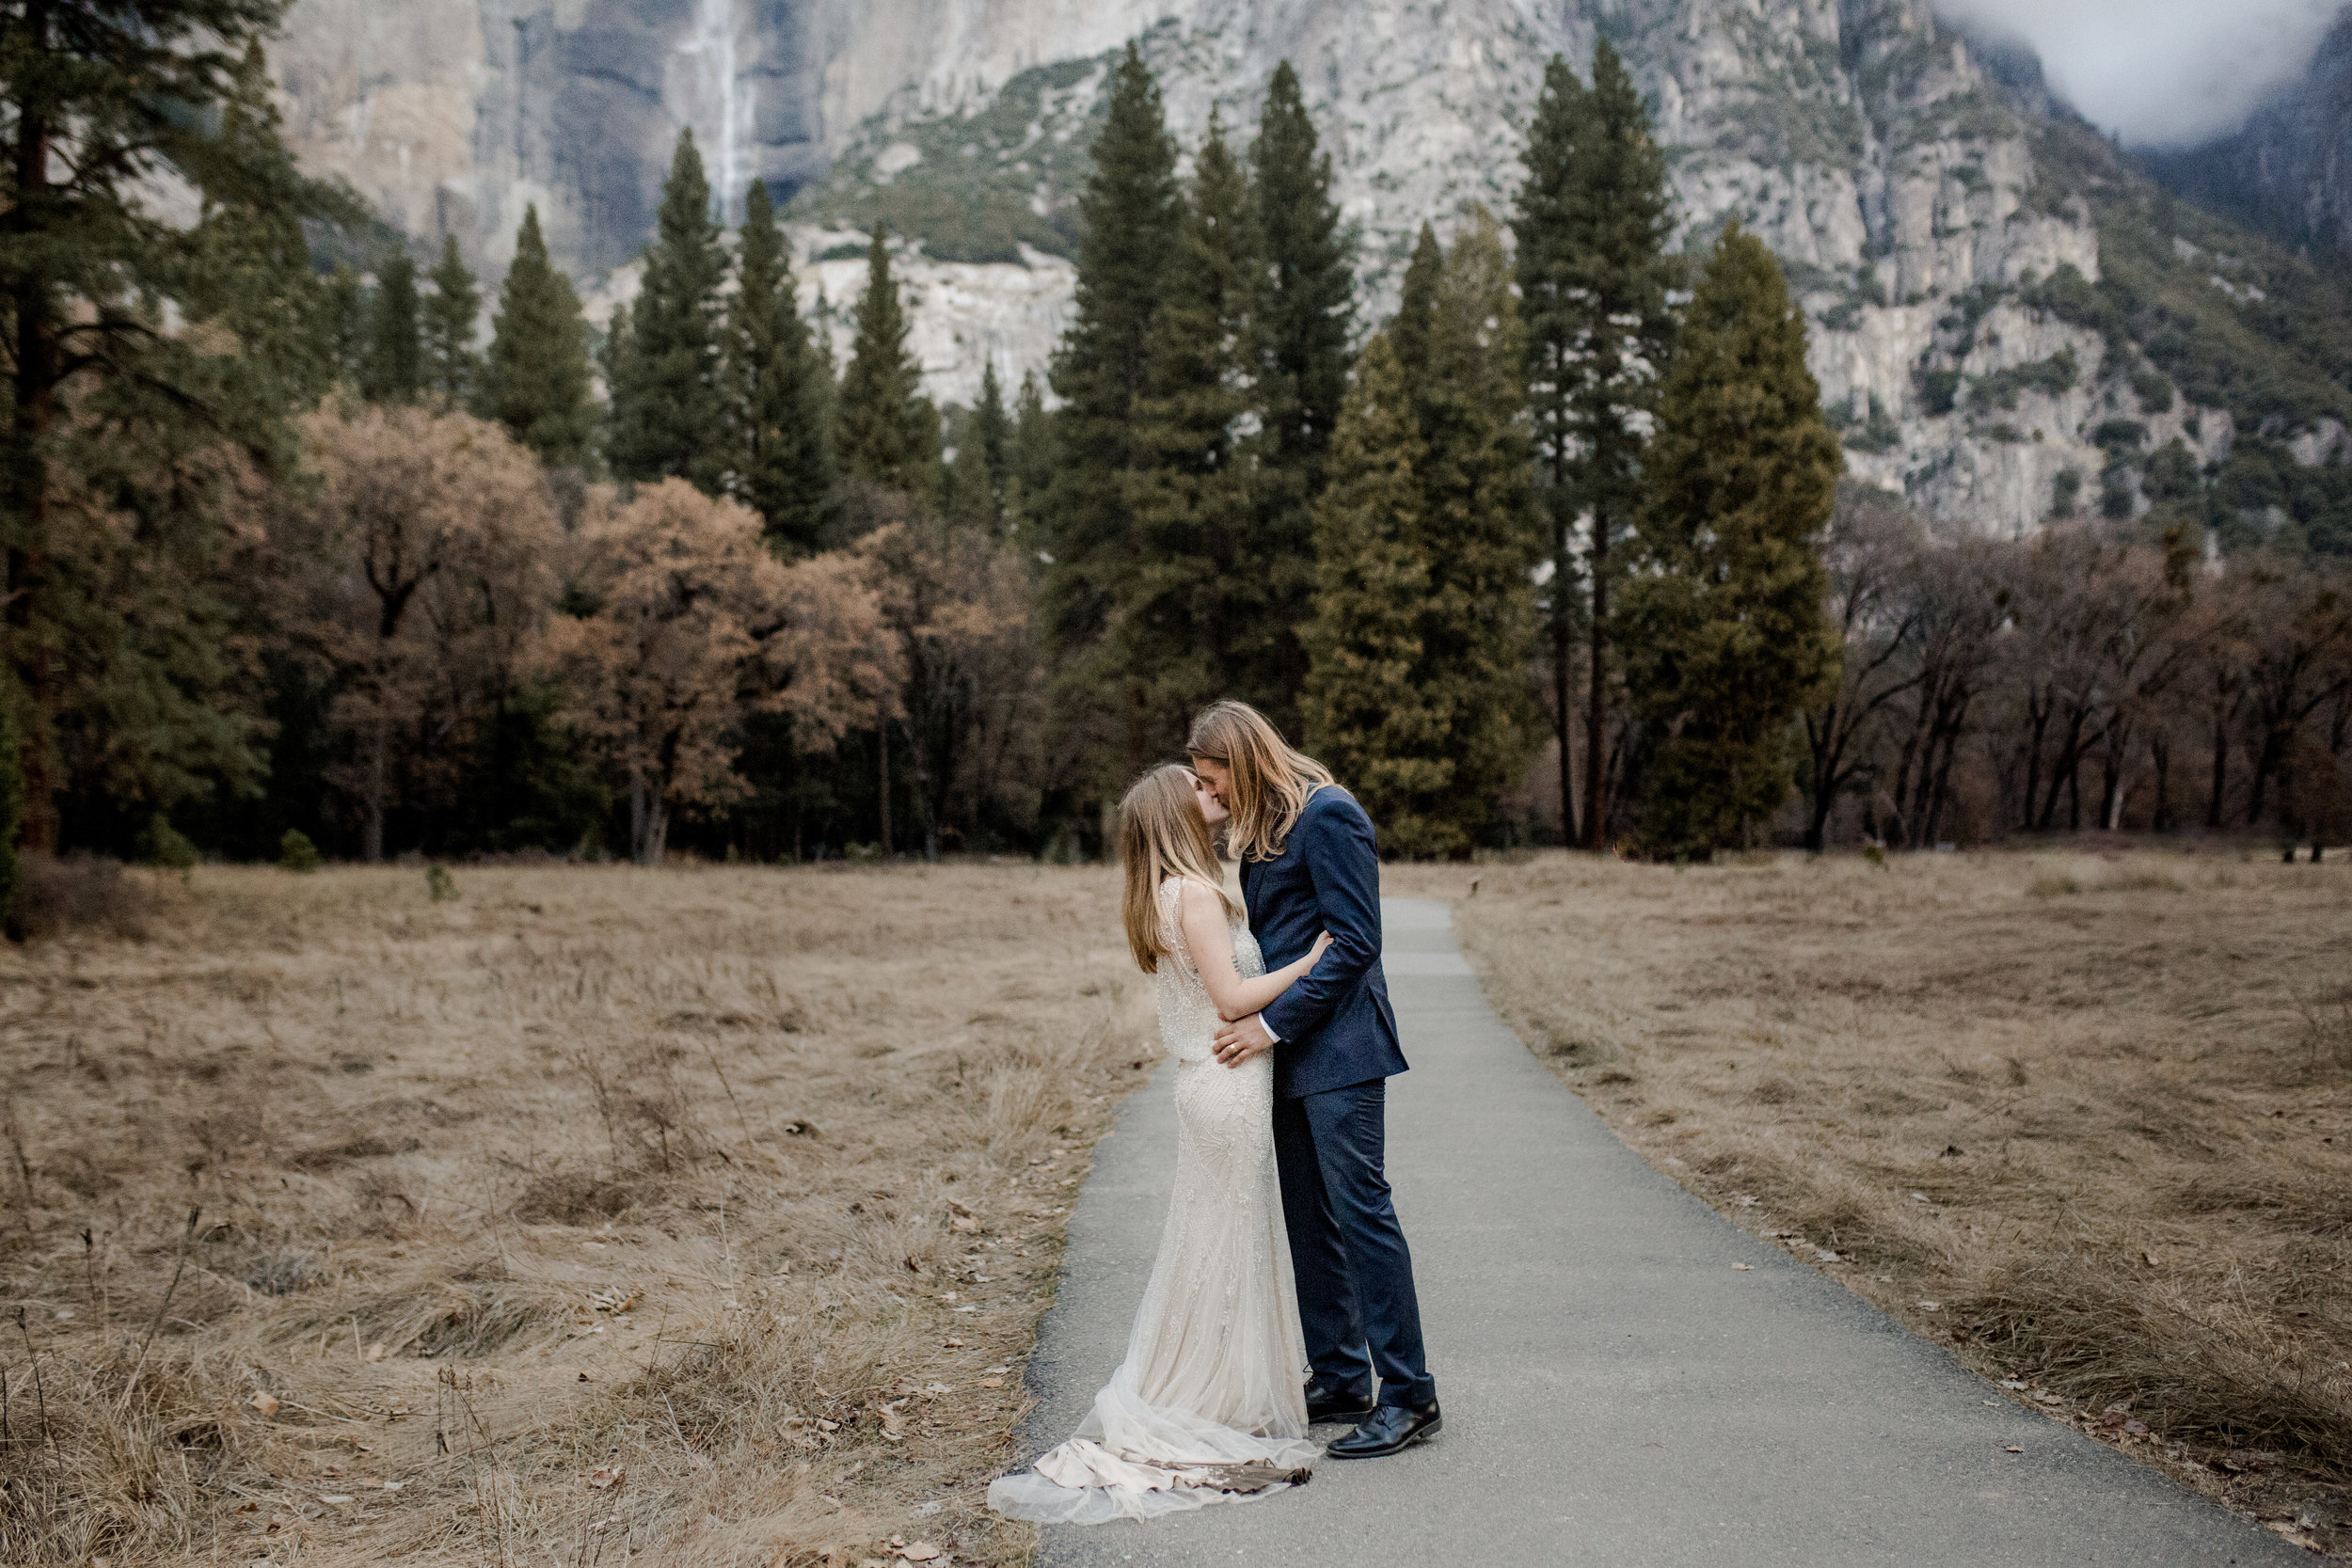 nicole-daacke-photography-yousemite-national-park-elopement-photographer-winter-cloud-moody-elope-inspiration-yosemite-valley-tunnel-view-winter-cloud-fog-weather-wedding-photos-28.jpg